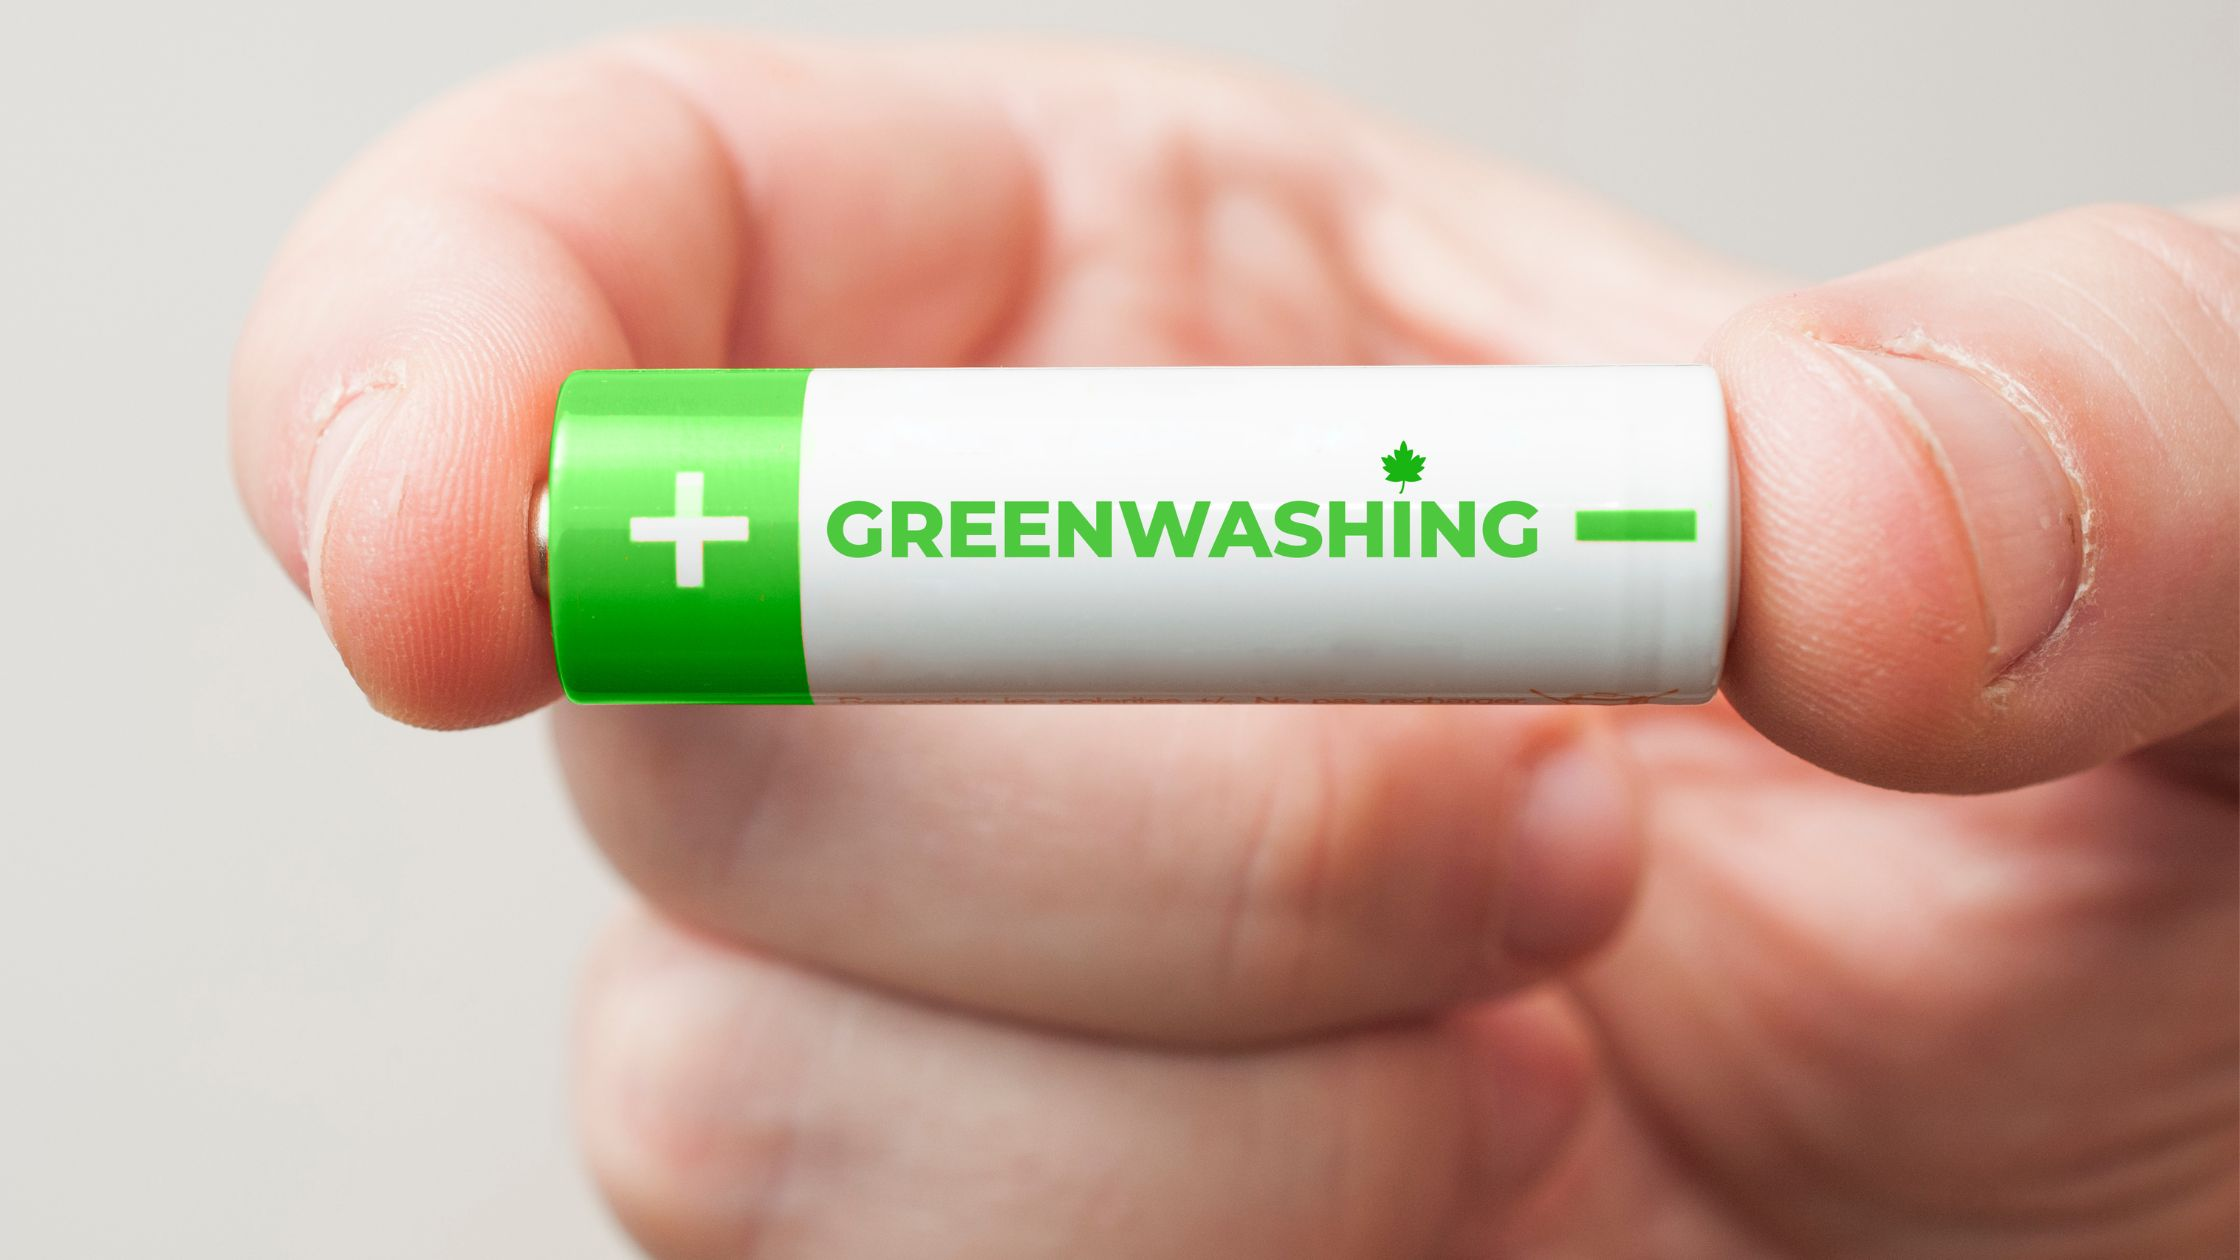 Greenwashing of products